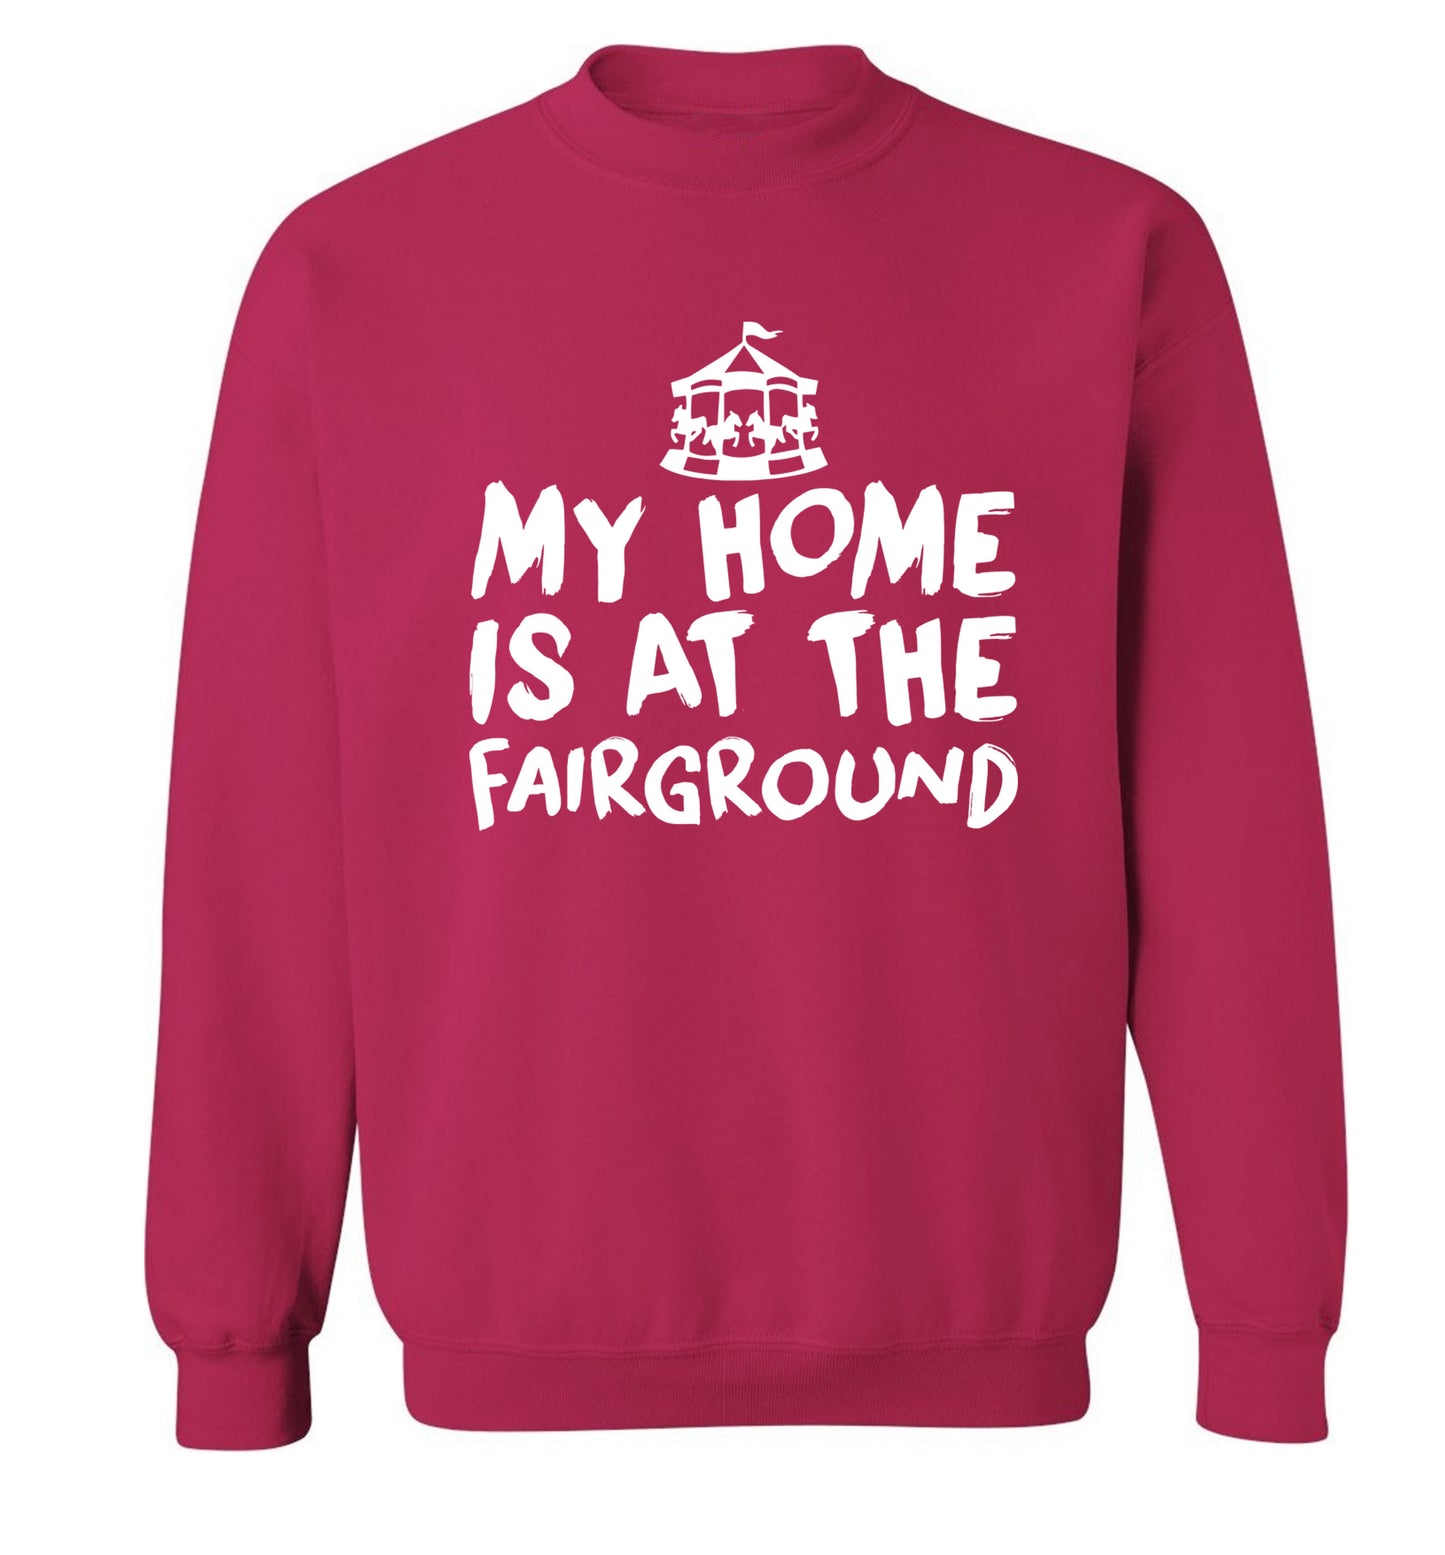 My home is at the fairground Adult's unisex pink Sweater 2XL